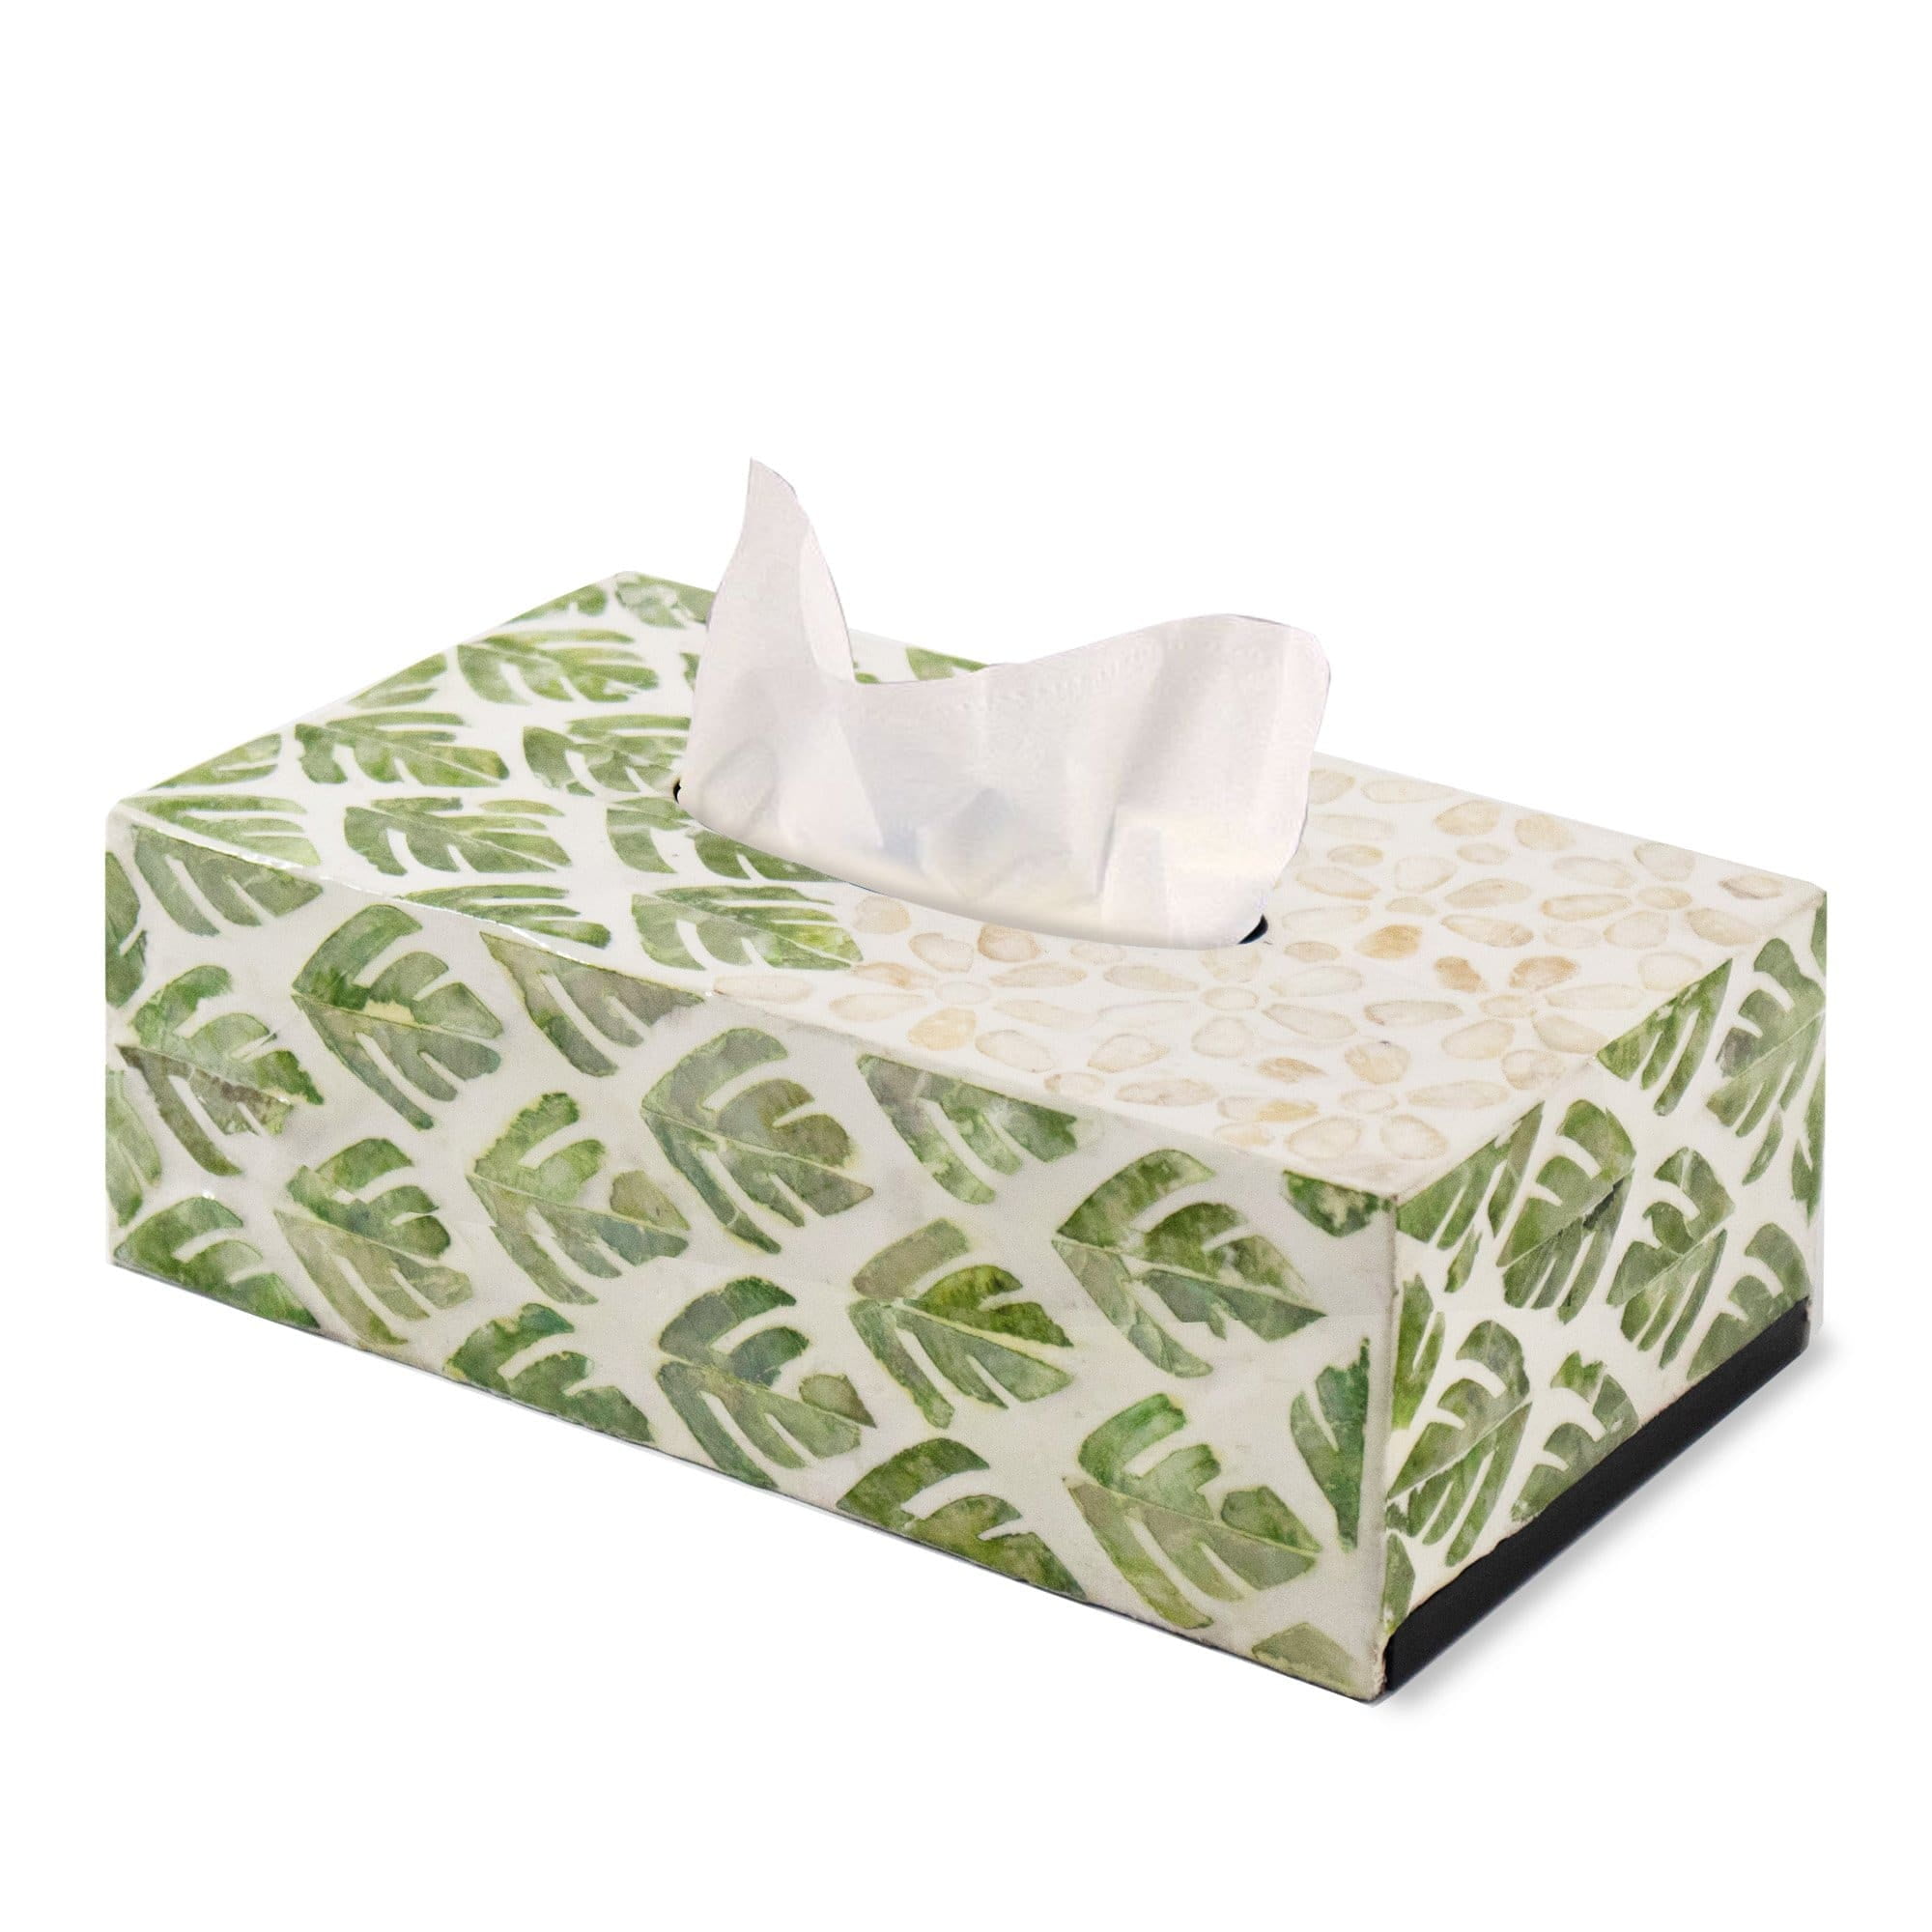 Shabby chic rose natural reversible tissue box cover